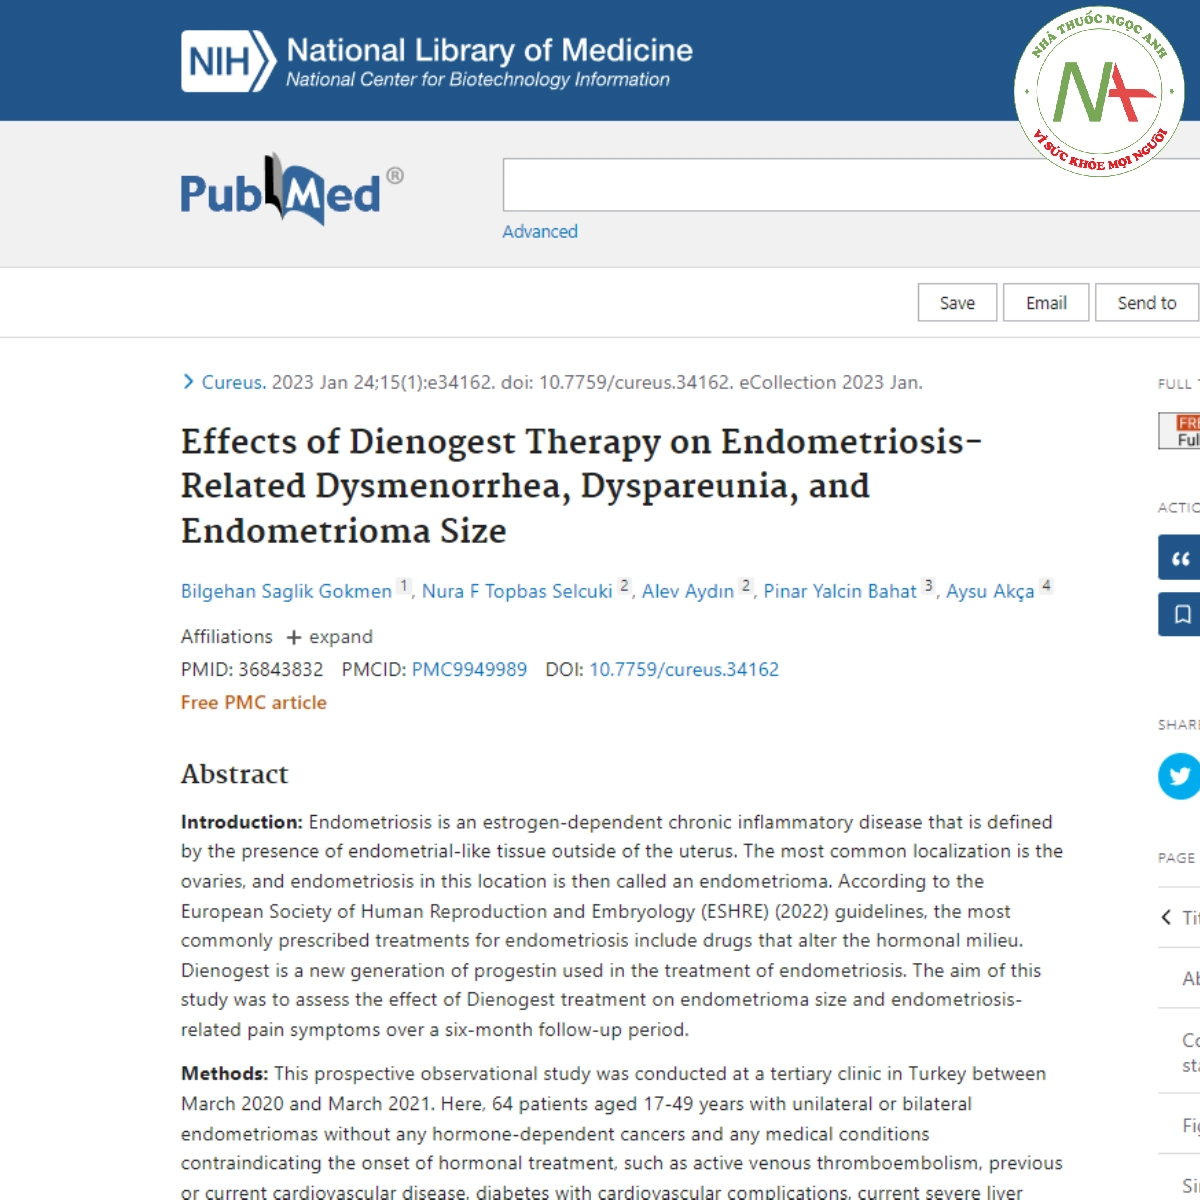 Effects of Dienogest Therapy on Endometriosis-Related Dysmenorrhea, Dyspareunia, and Endometrioma Size